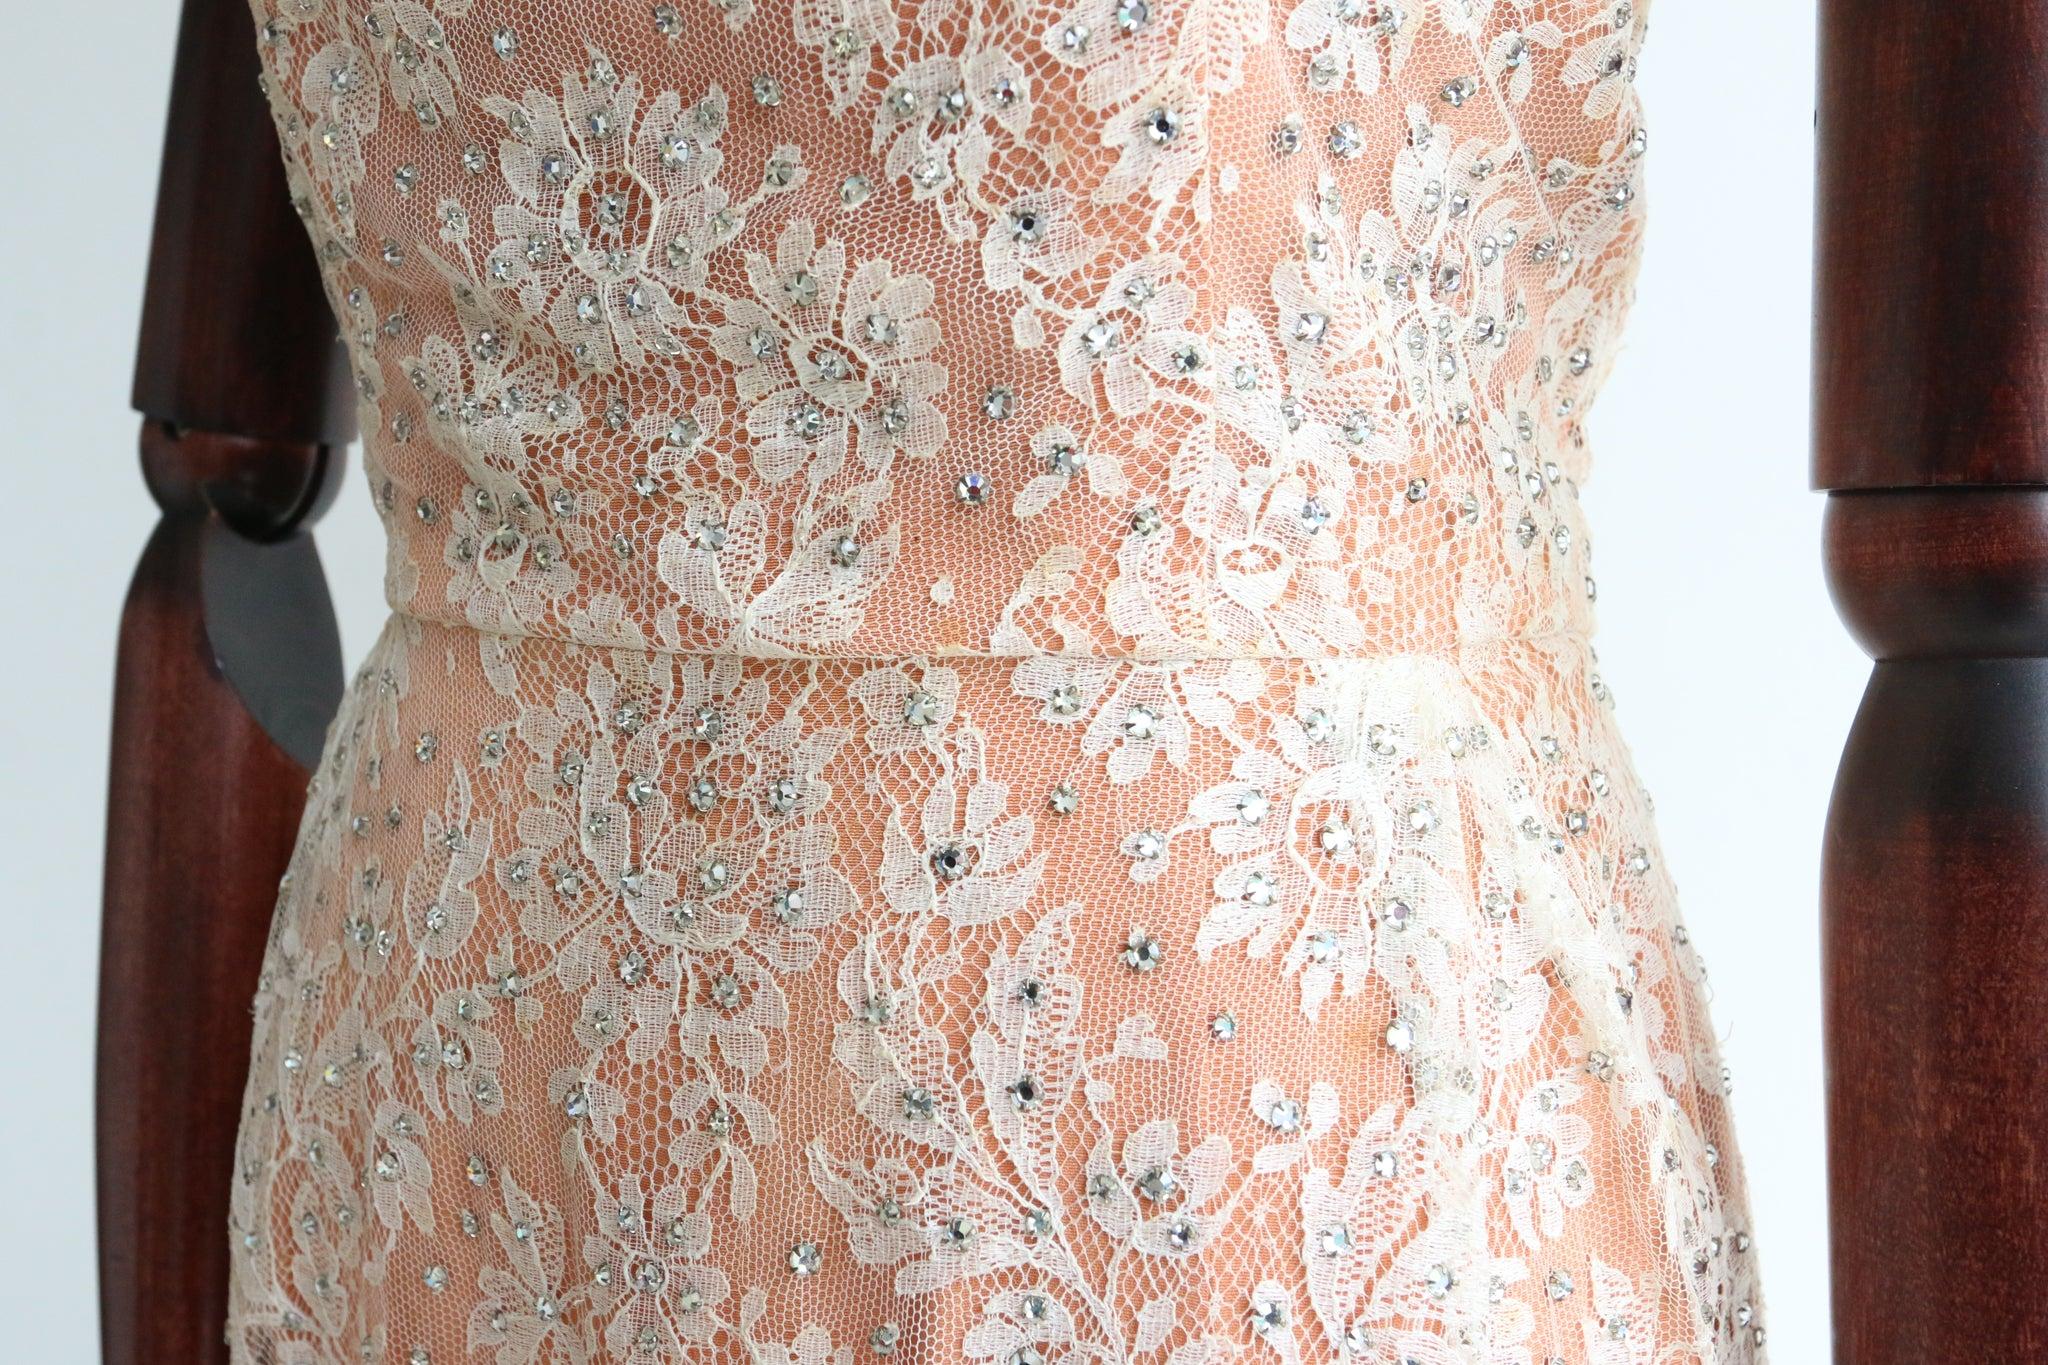 Vintage 1950's Howard Greer Lace and Rhinestone Embellished Dress UK 8 US 4 In Good Condition For Sale In Cheltenham, GB